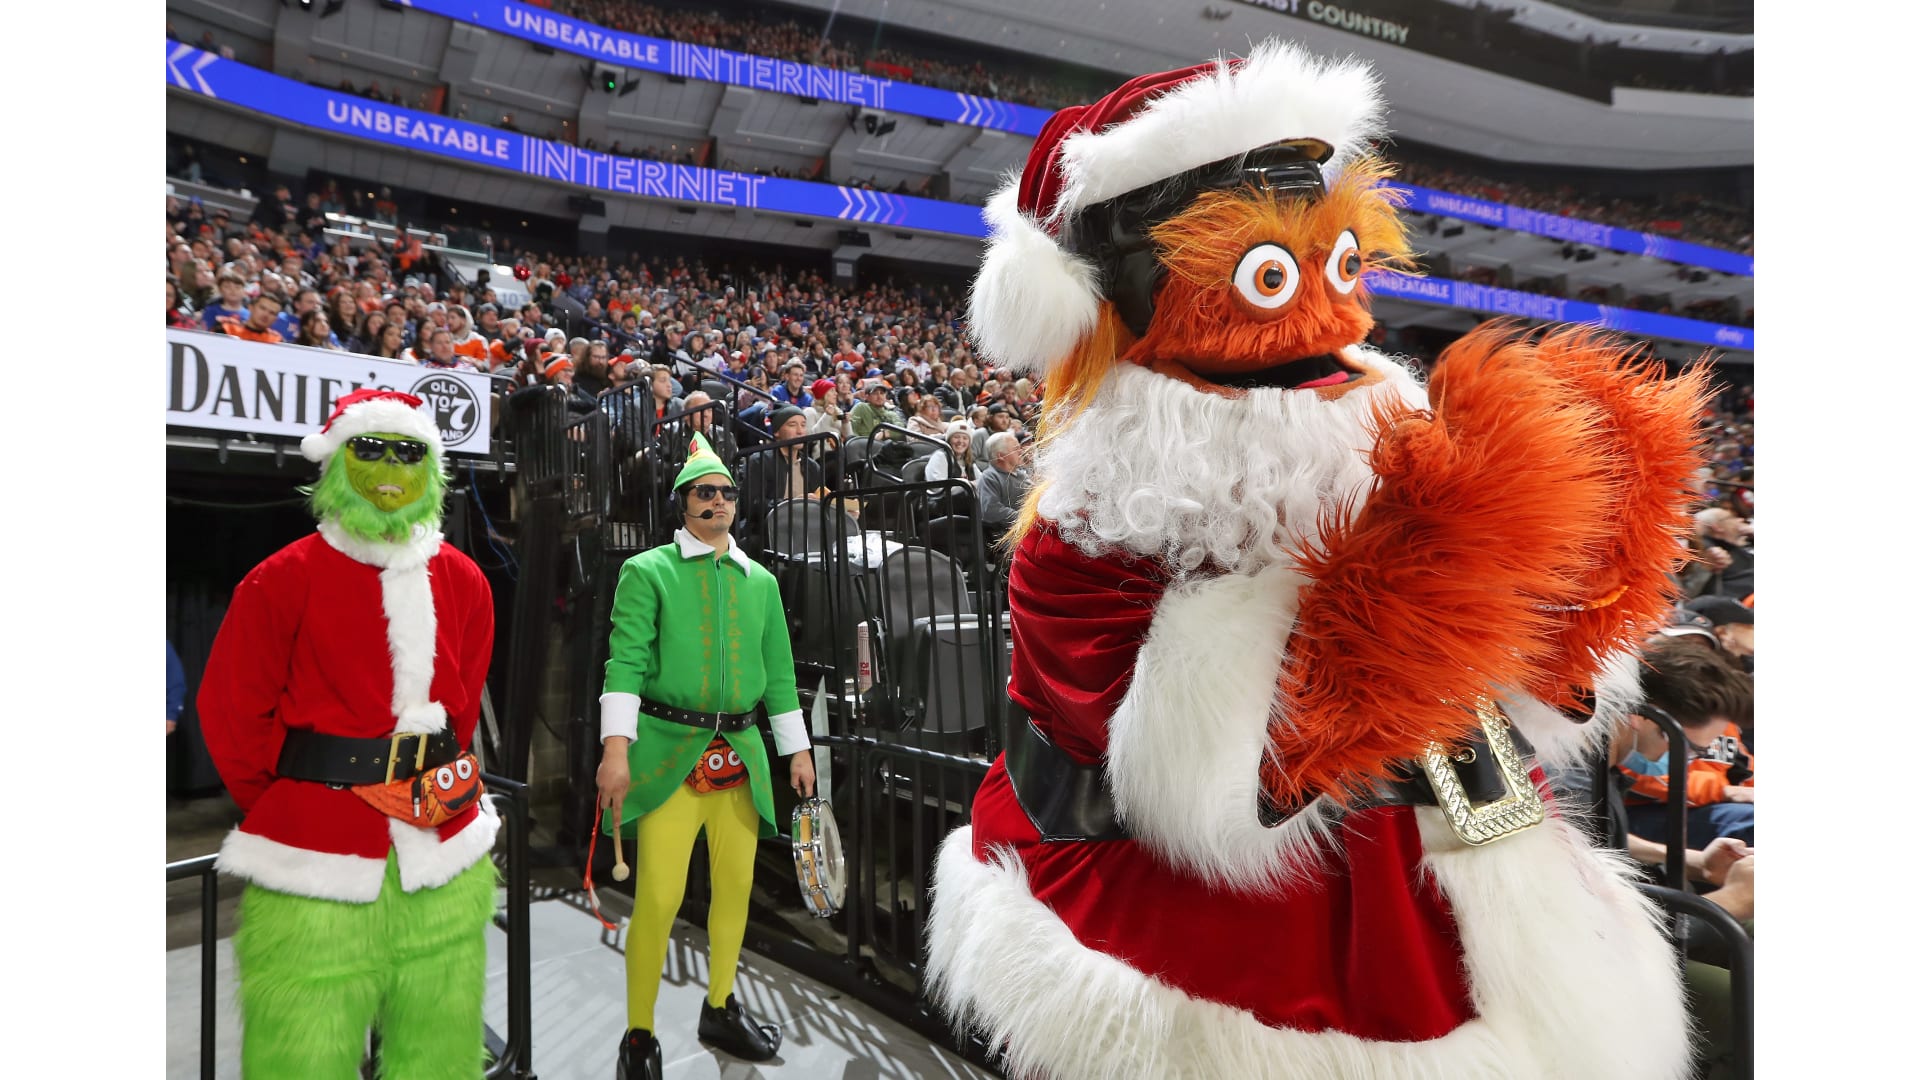 Hide Your Kids: The Philadelphia Flyers' New Mascot Gritty is a Giant  Orange Monster With Googly Eyes - Bloody Disgusting